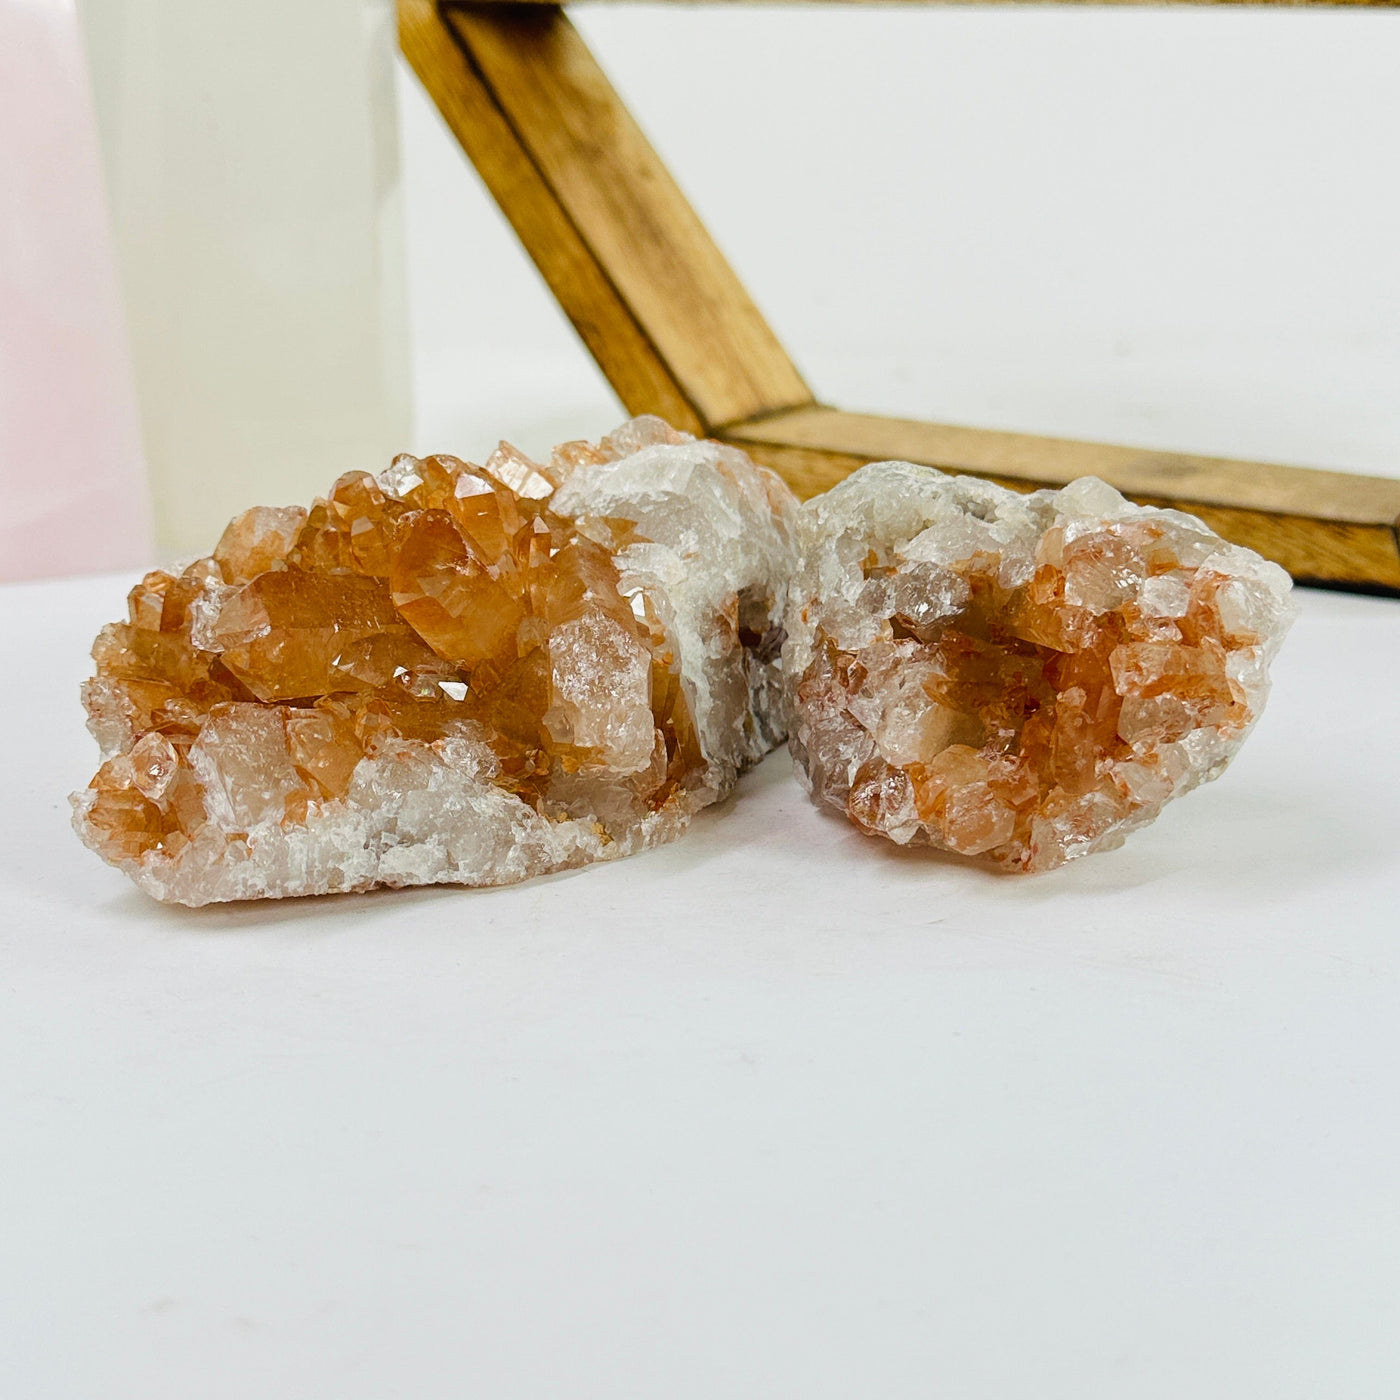 tangerine quartz cluster with decorations in the background